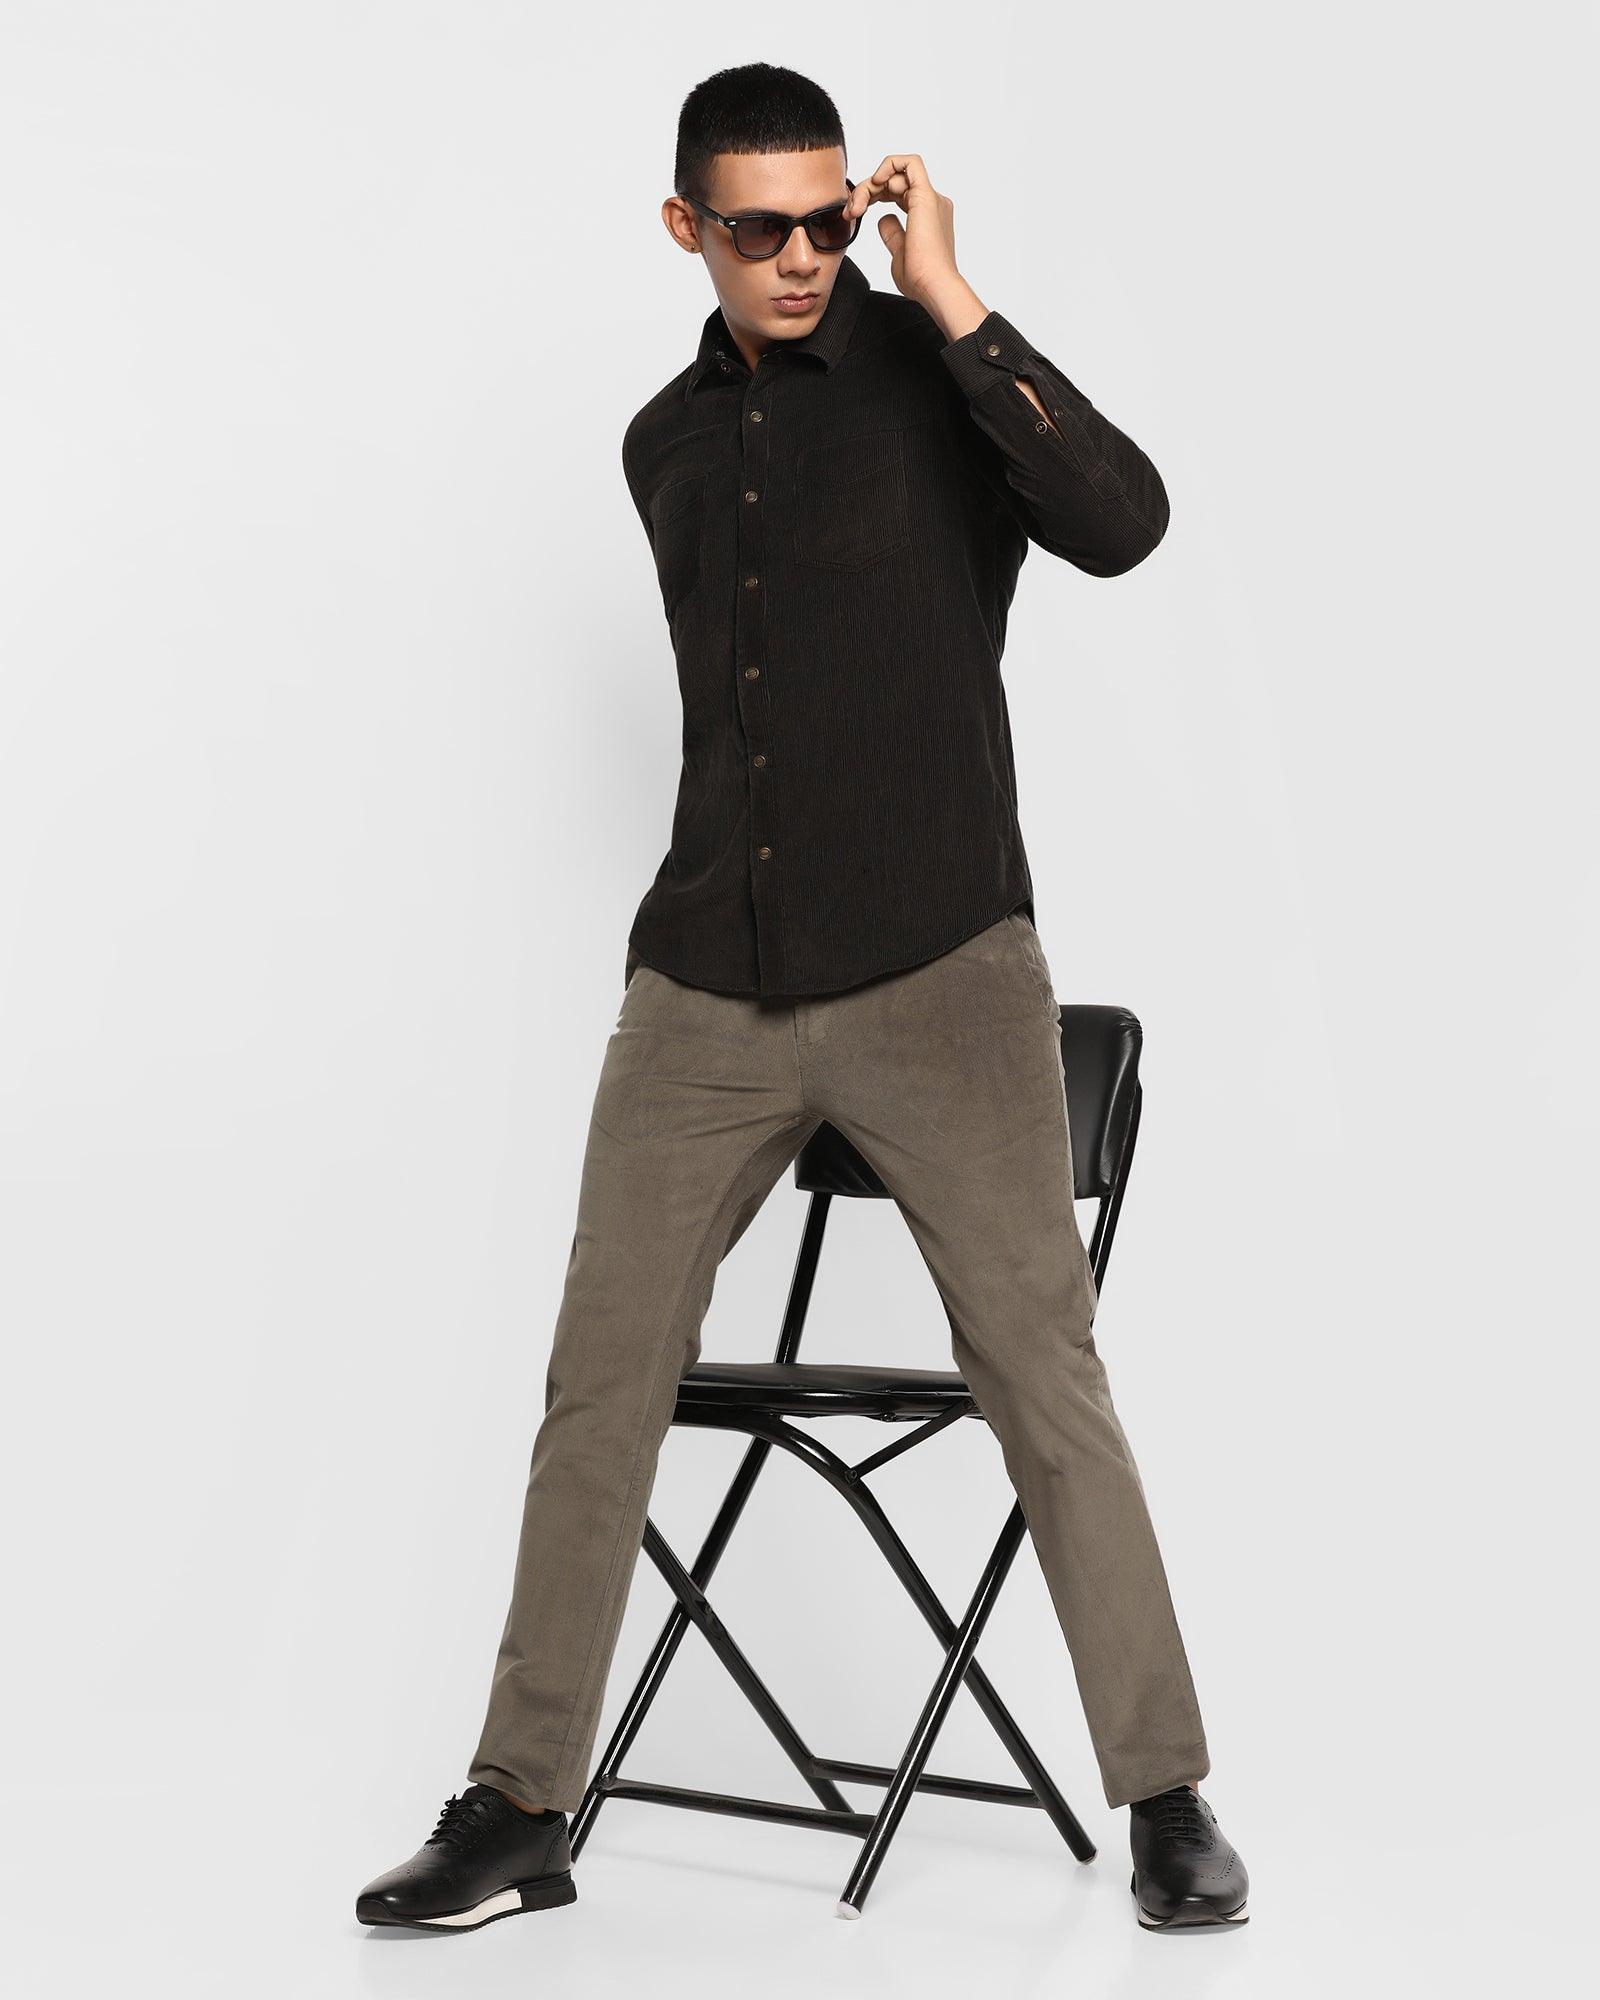 Casual Olive Solid Shirt - Setra